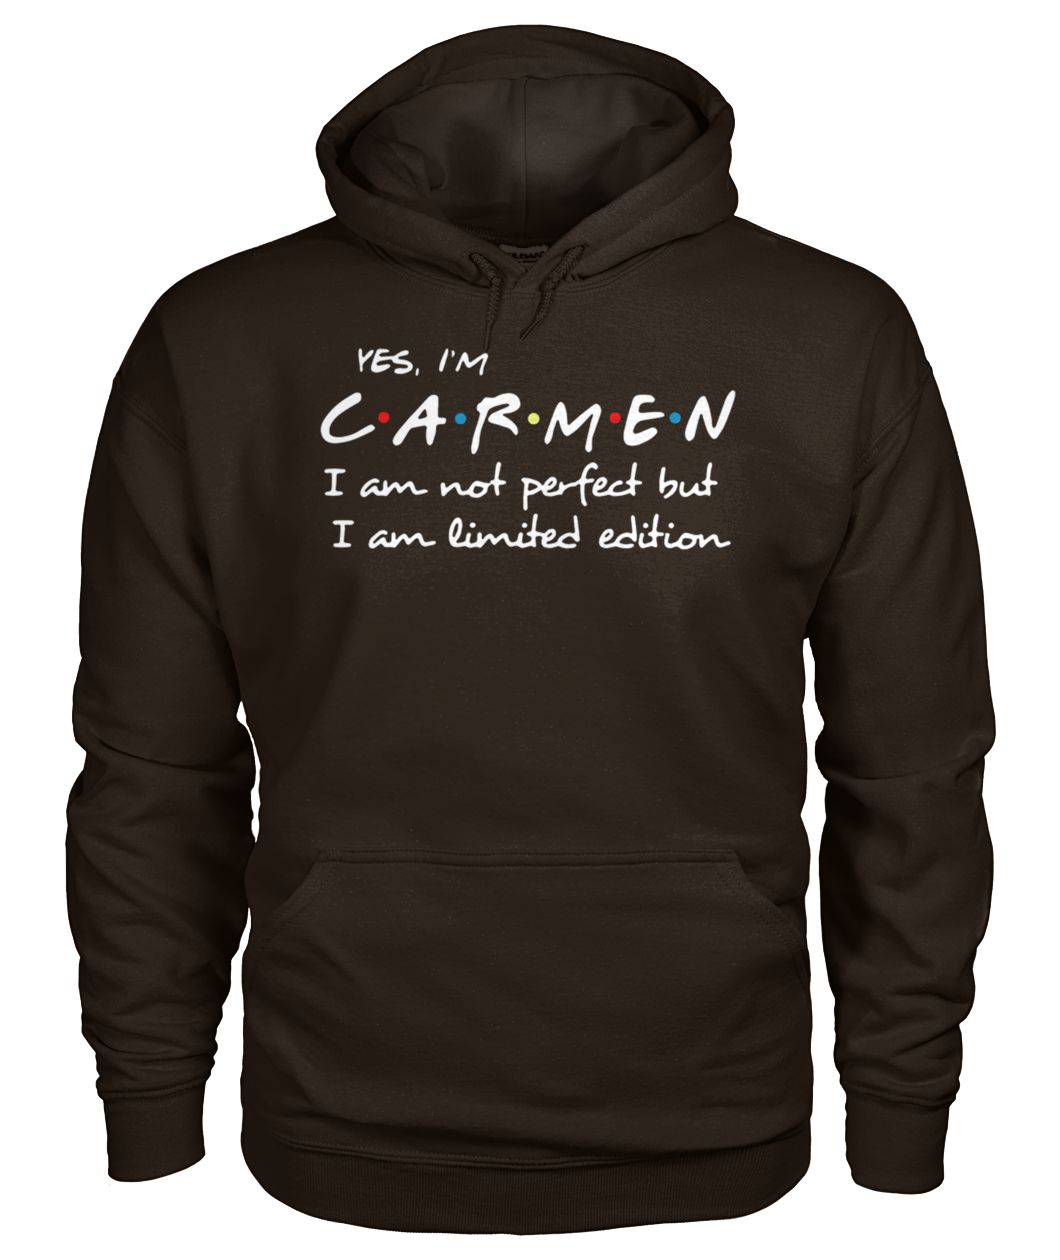 Yes I'm carmen I am not perfect but I am limited edition gildan hoodie